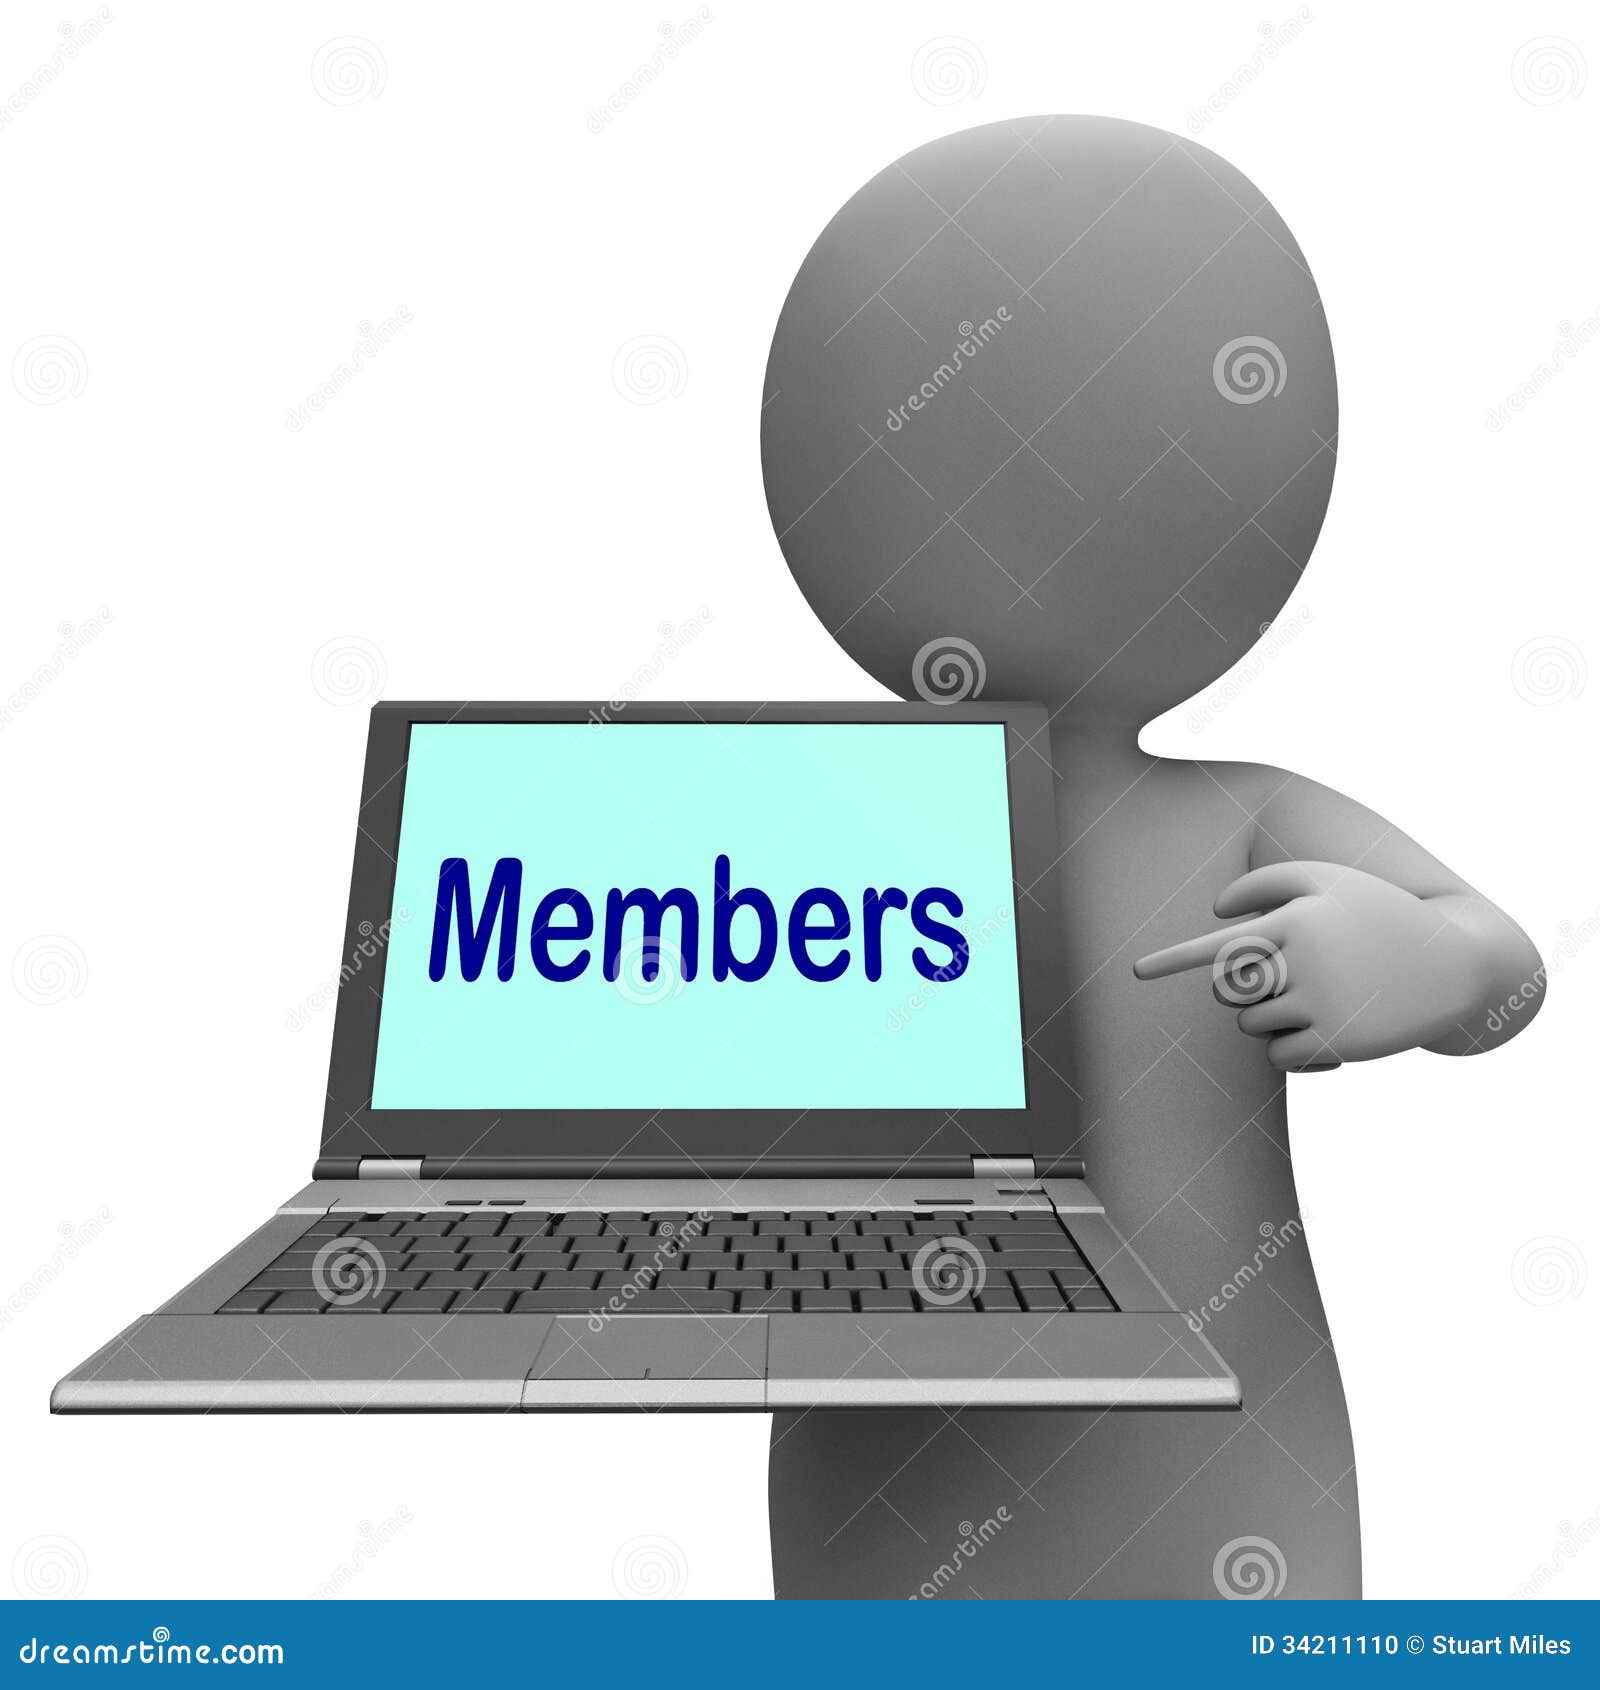 members laptop shows member register and web subscribing